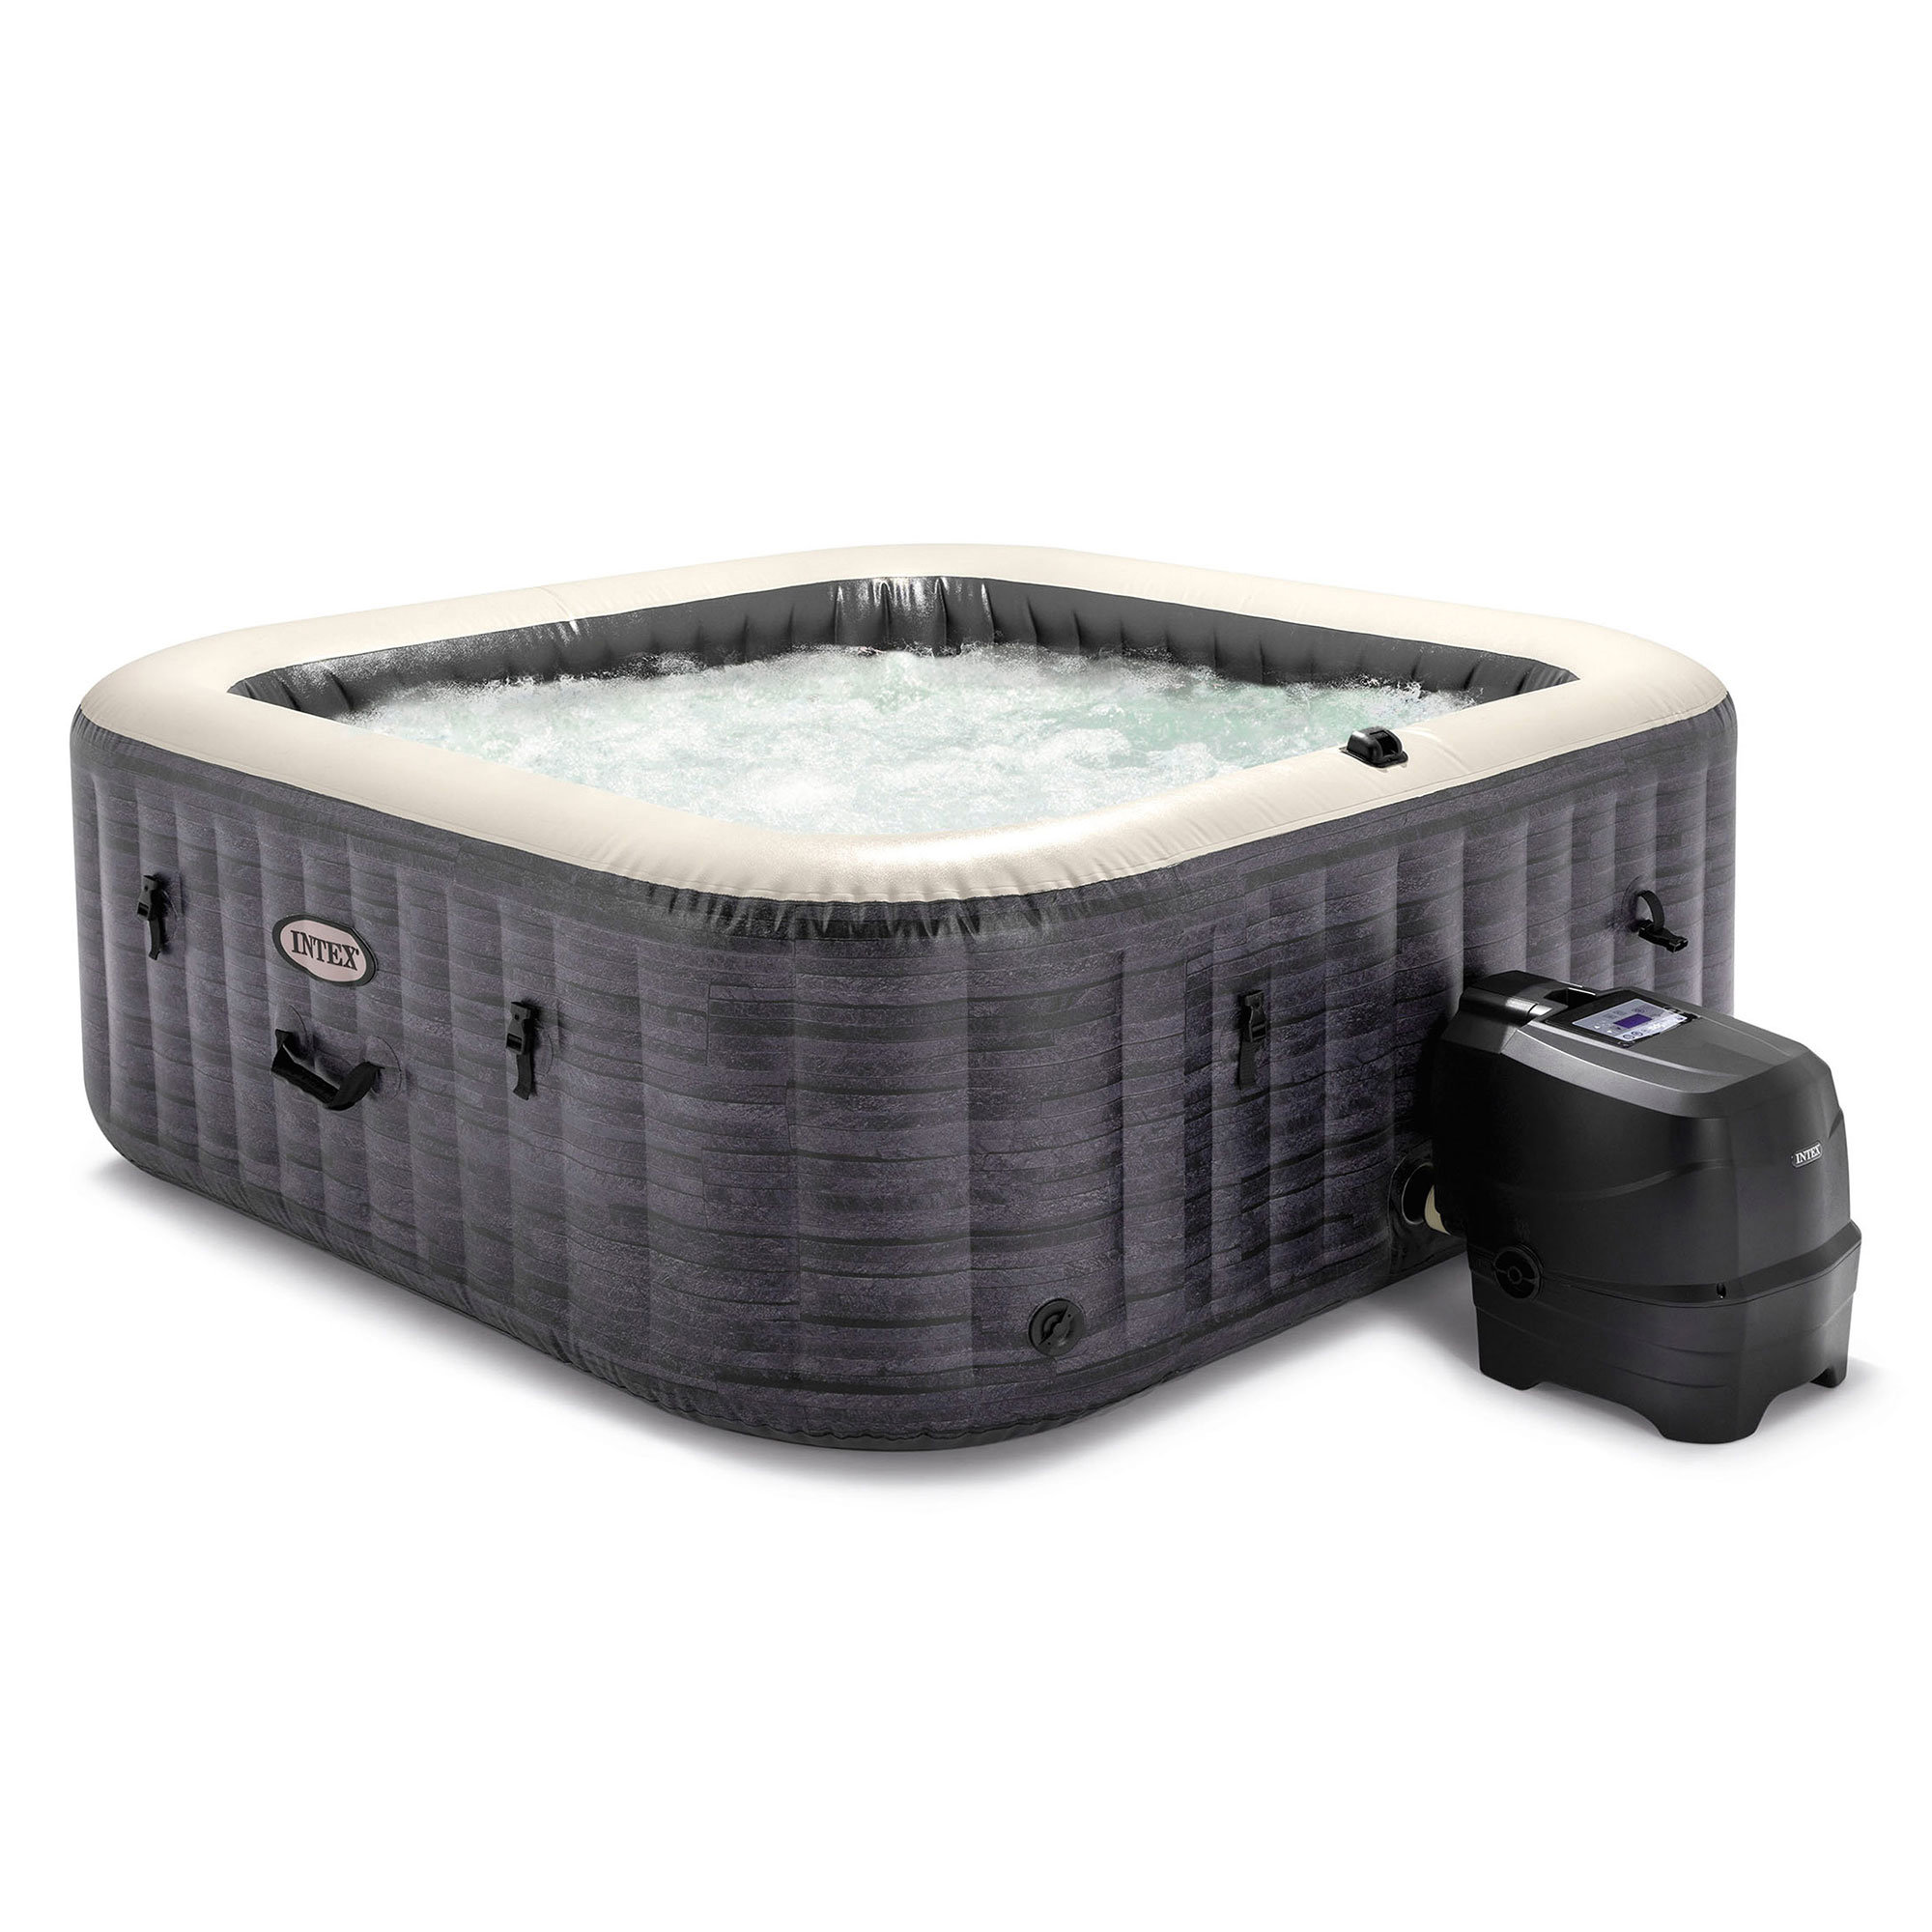 gødning pisk protein Intex PureSpa Plus 6 Person Inflatable Square Hot Tub w/ 140 AirJets,  Greystone & Reviews | Wayfair